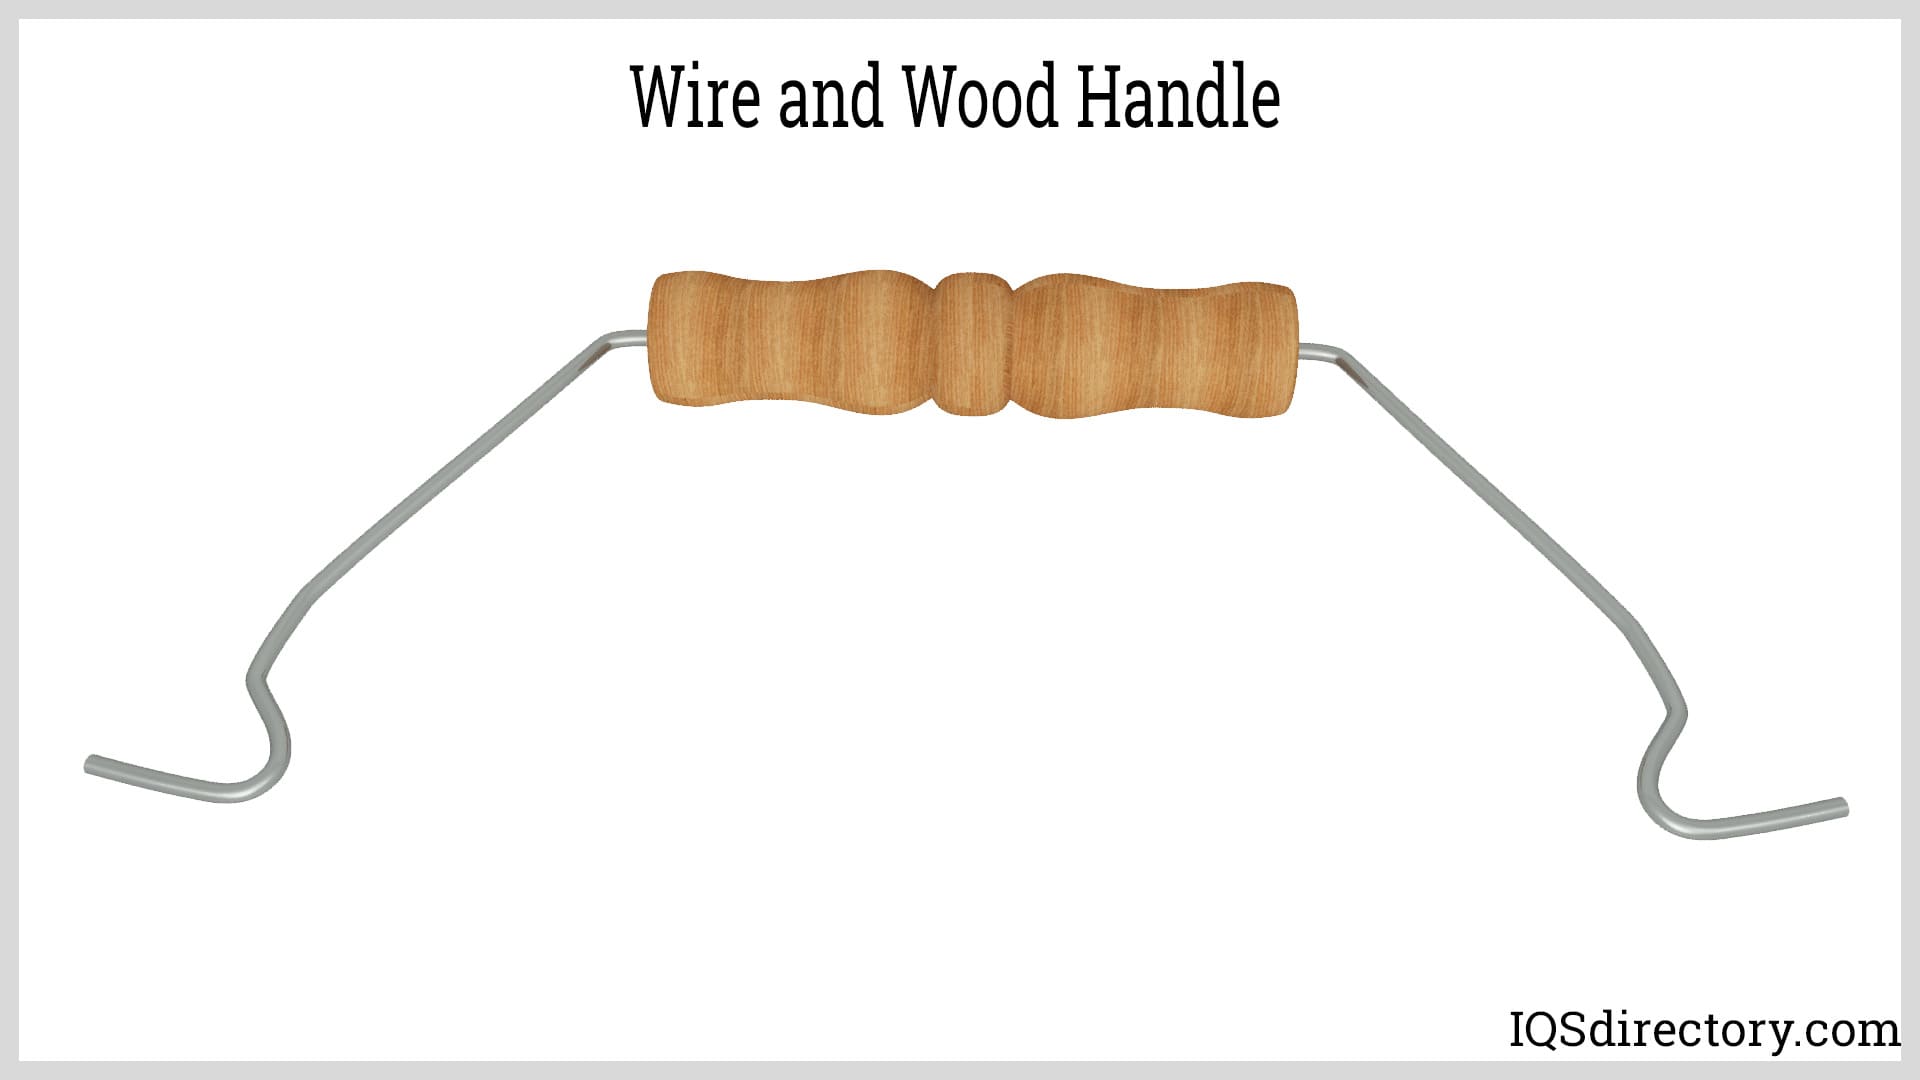 Wire and Wood Handle